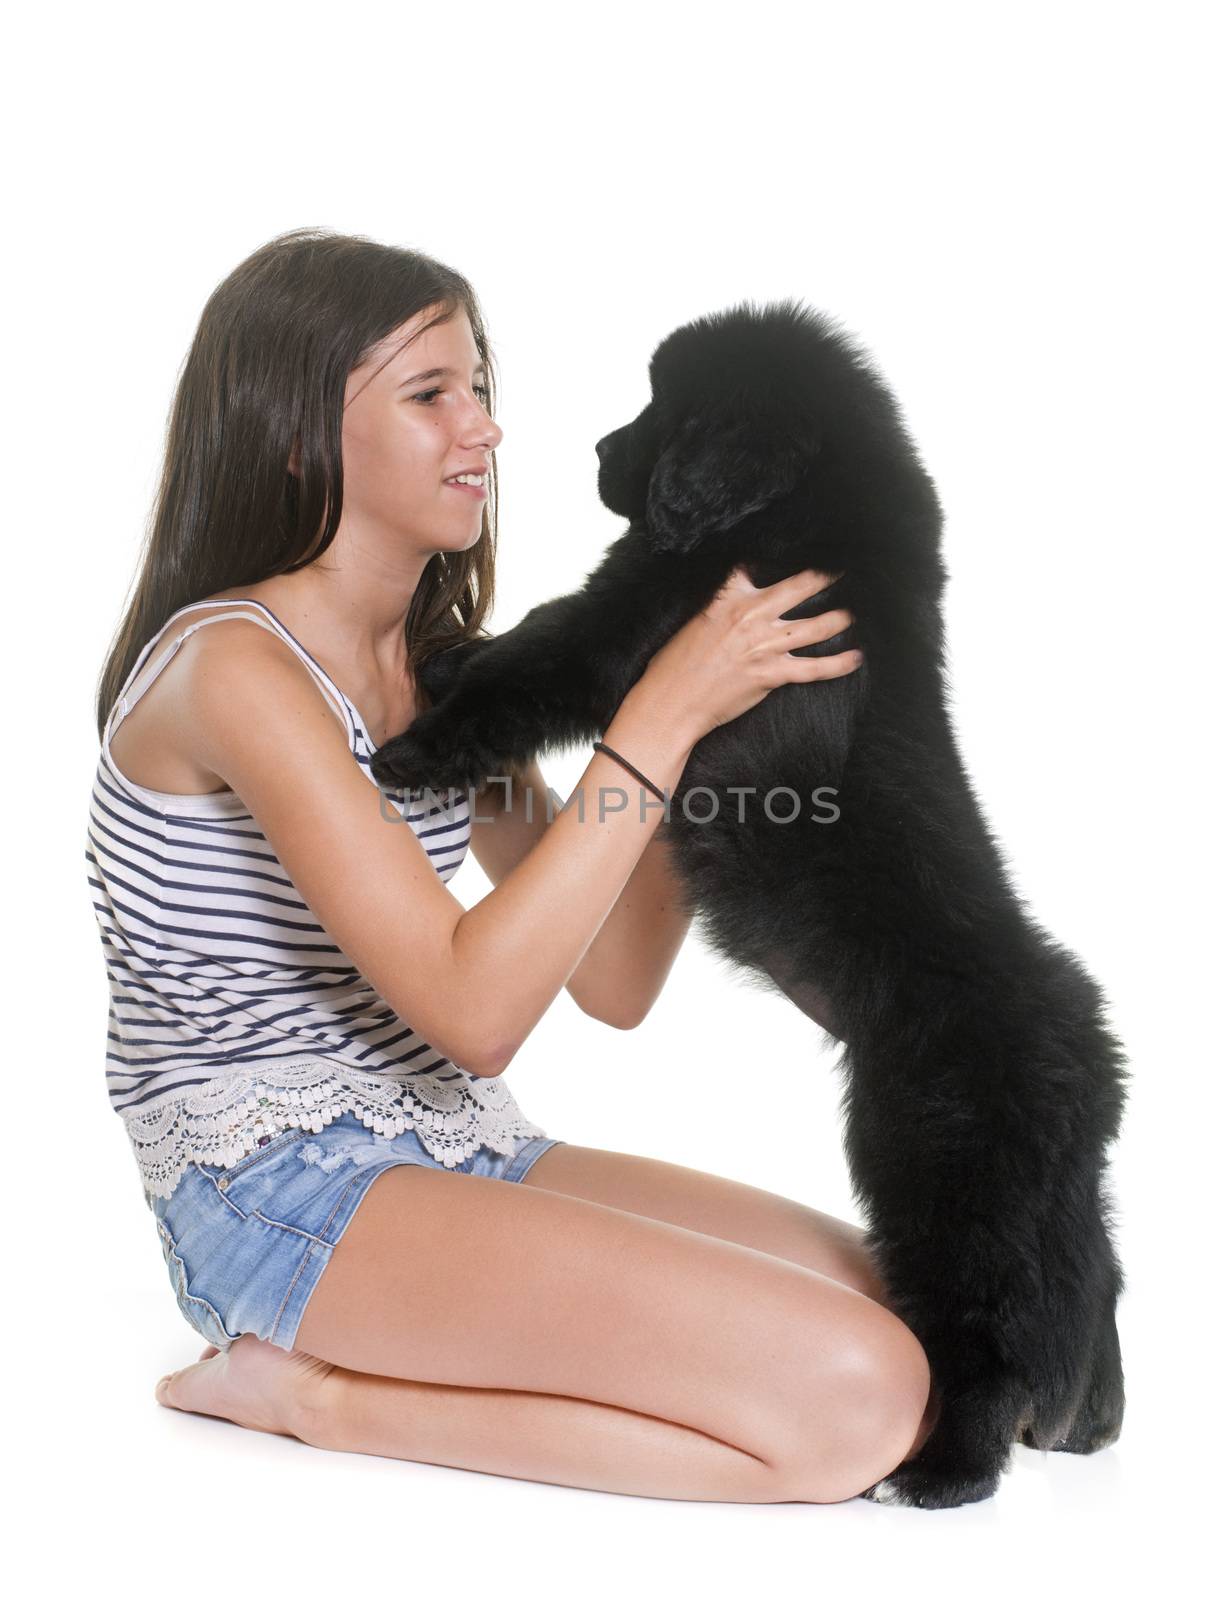 puppy newfoundland dog and child in front of white background